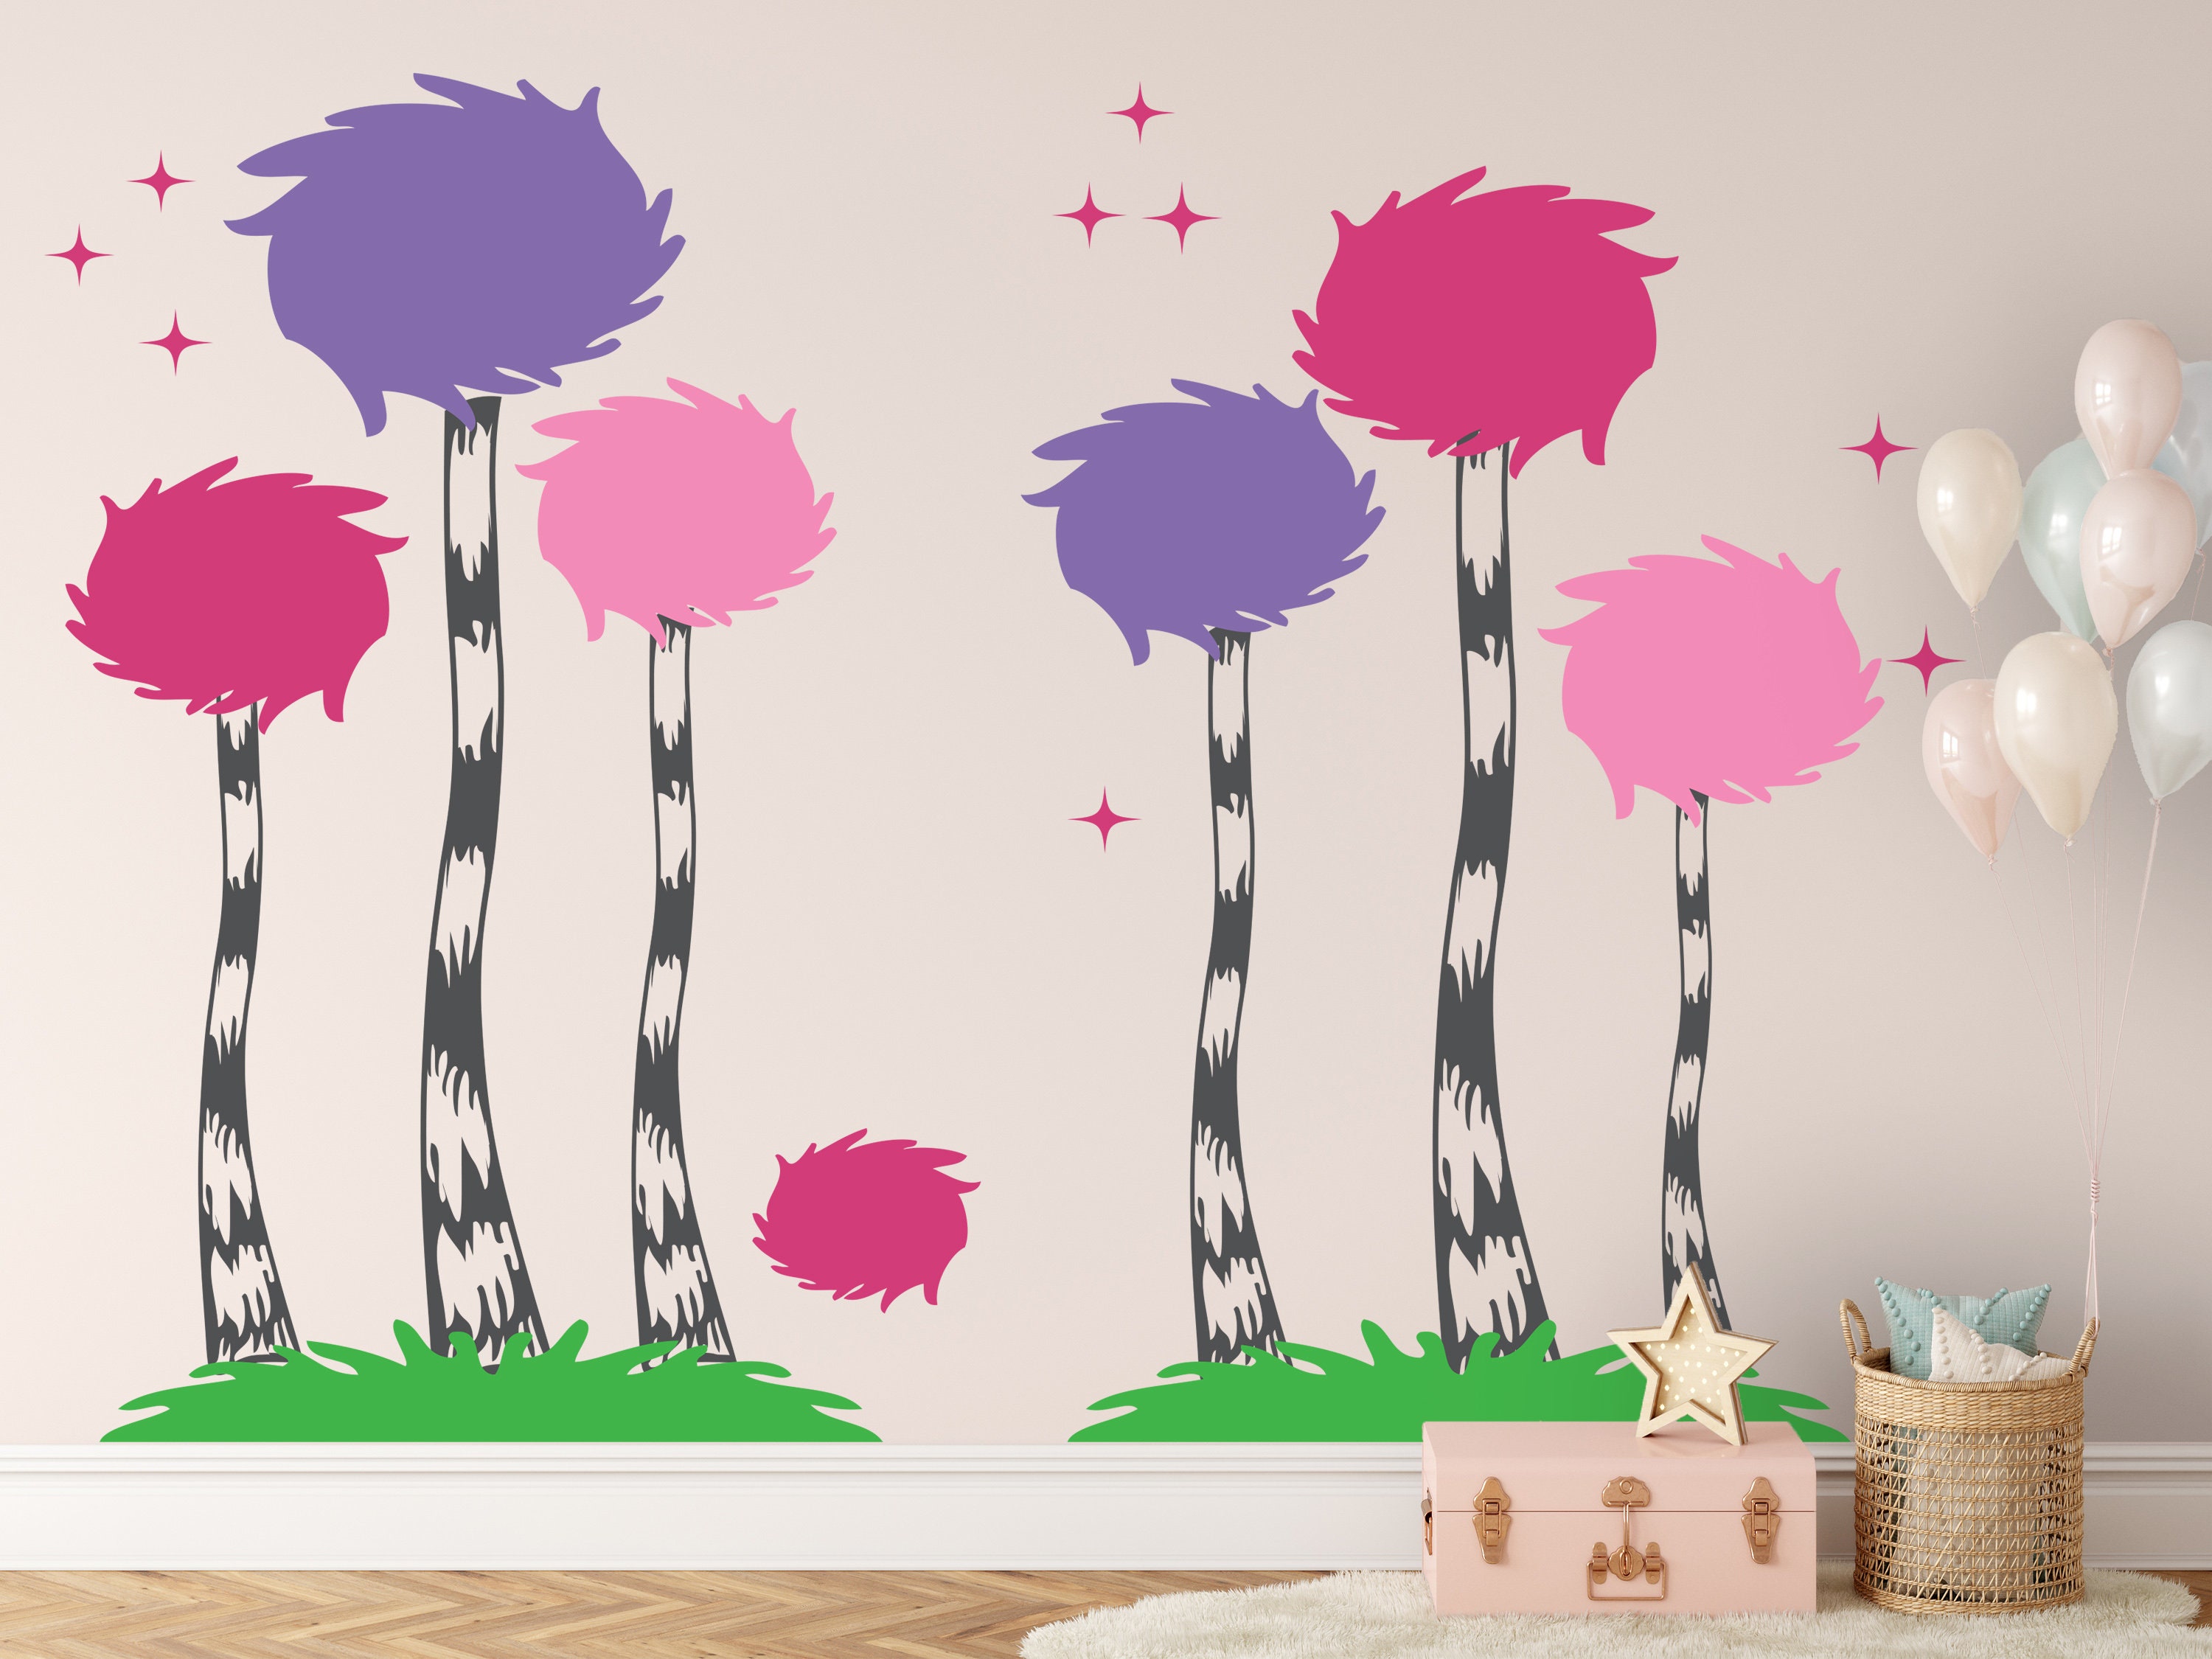 The Lorax Wall Vinyl Decal